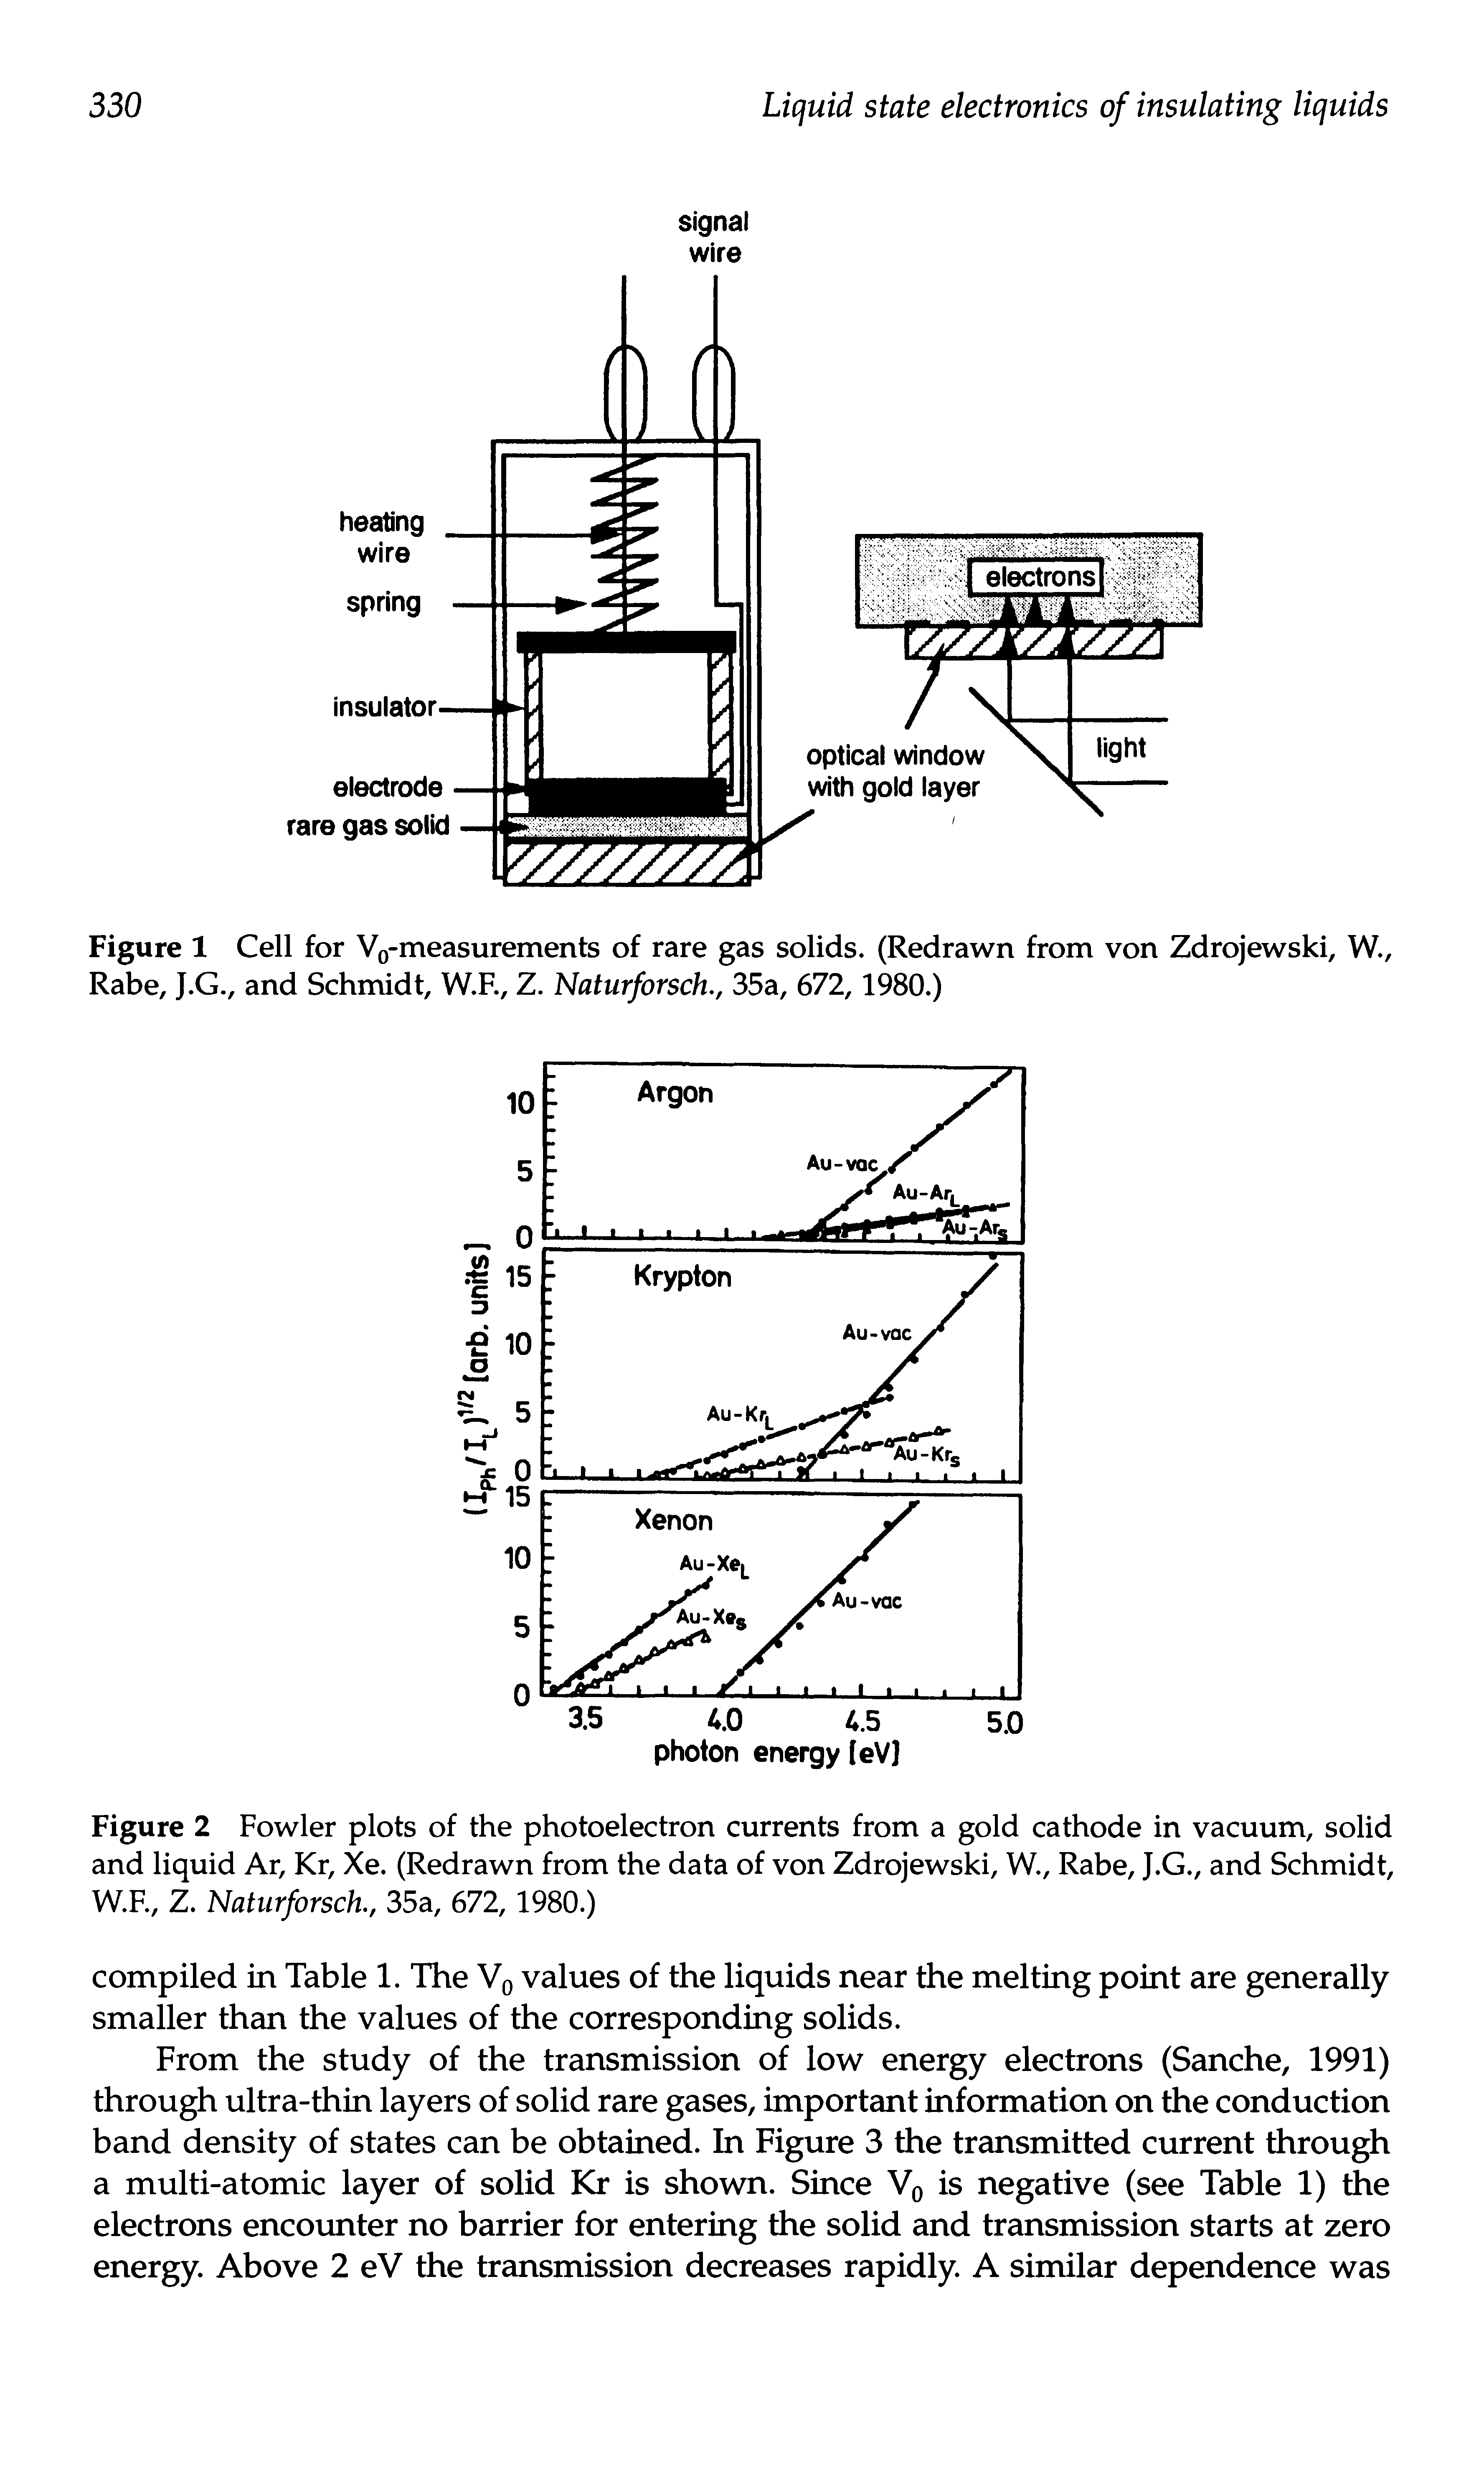 Figure 2 Fowler plots of the photoelectron currents from a gold cathode in vacuum, solid and liquid Ar, Kr, Xe. (Redrawn from the data of von Zdrojewski, W., Rabe, J.G., and Schmidt, W.F., Z. Naturforsch., 35a, 672,1980.)...